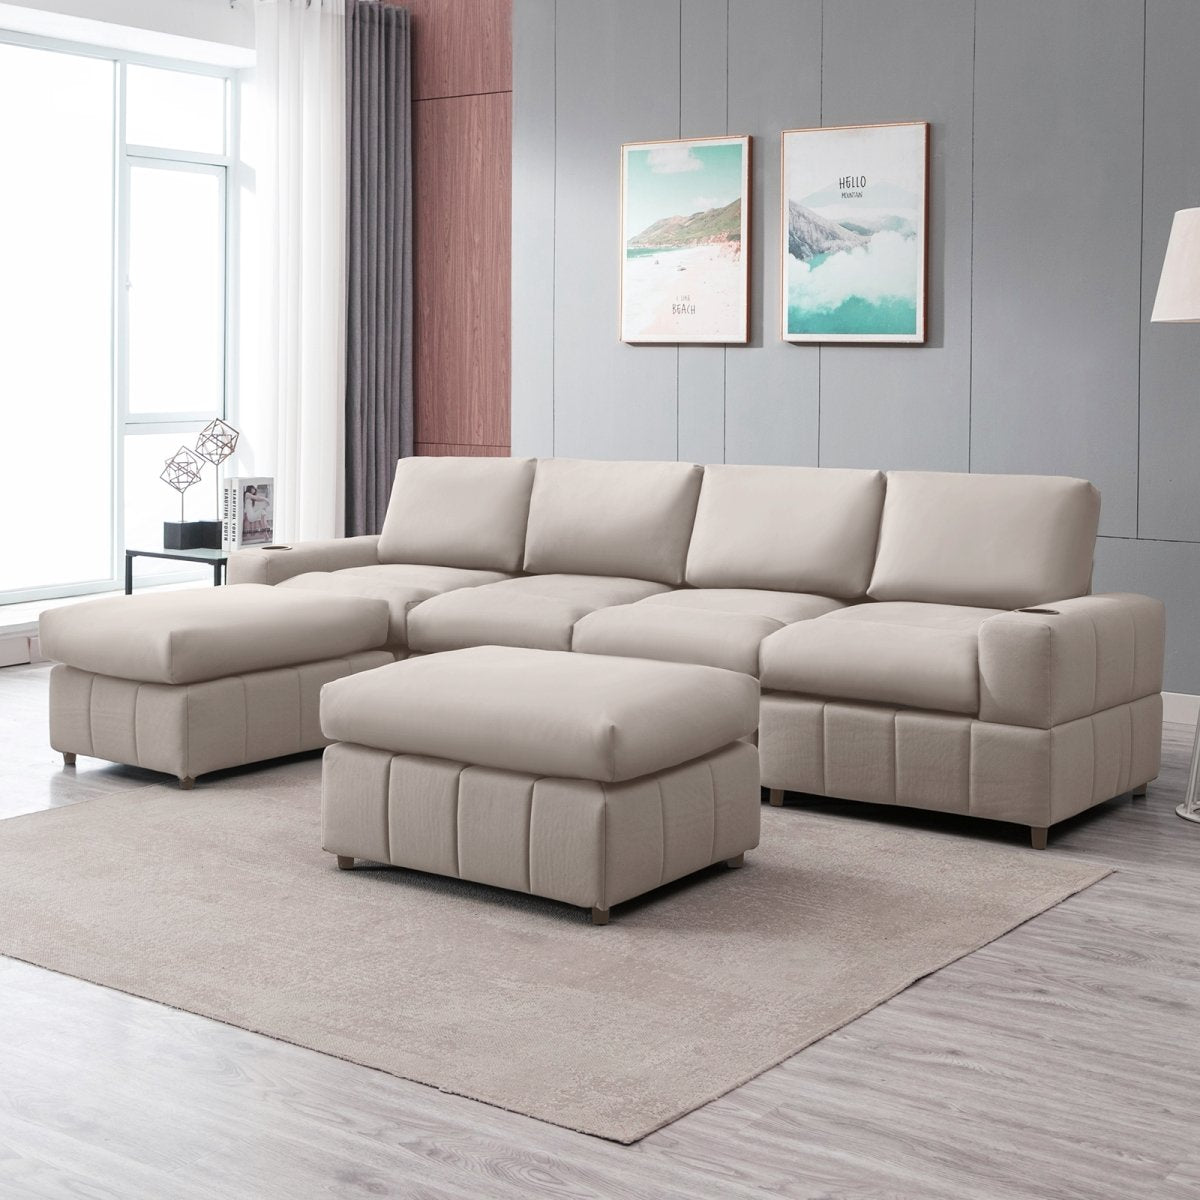 Convertible Sectional Sofa | U Shaped Modular Couch with Cup Holder - Mjkonesectional sofa